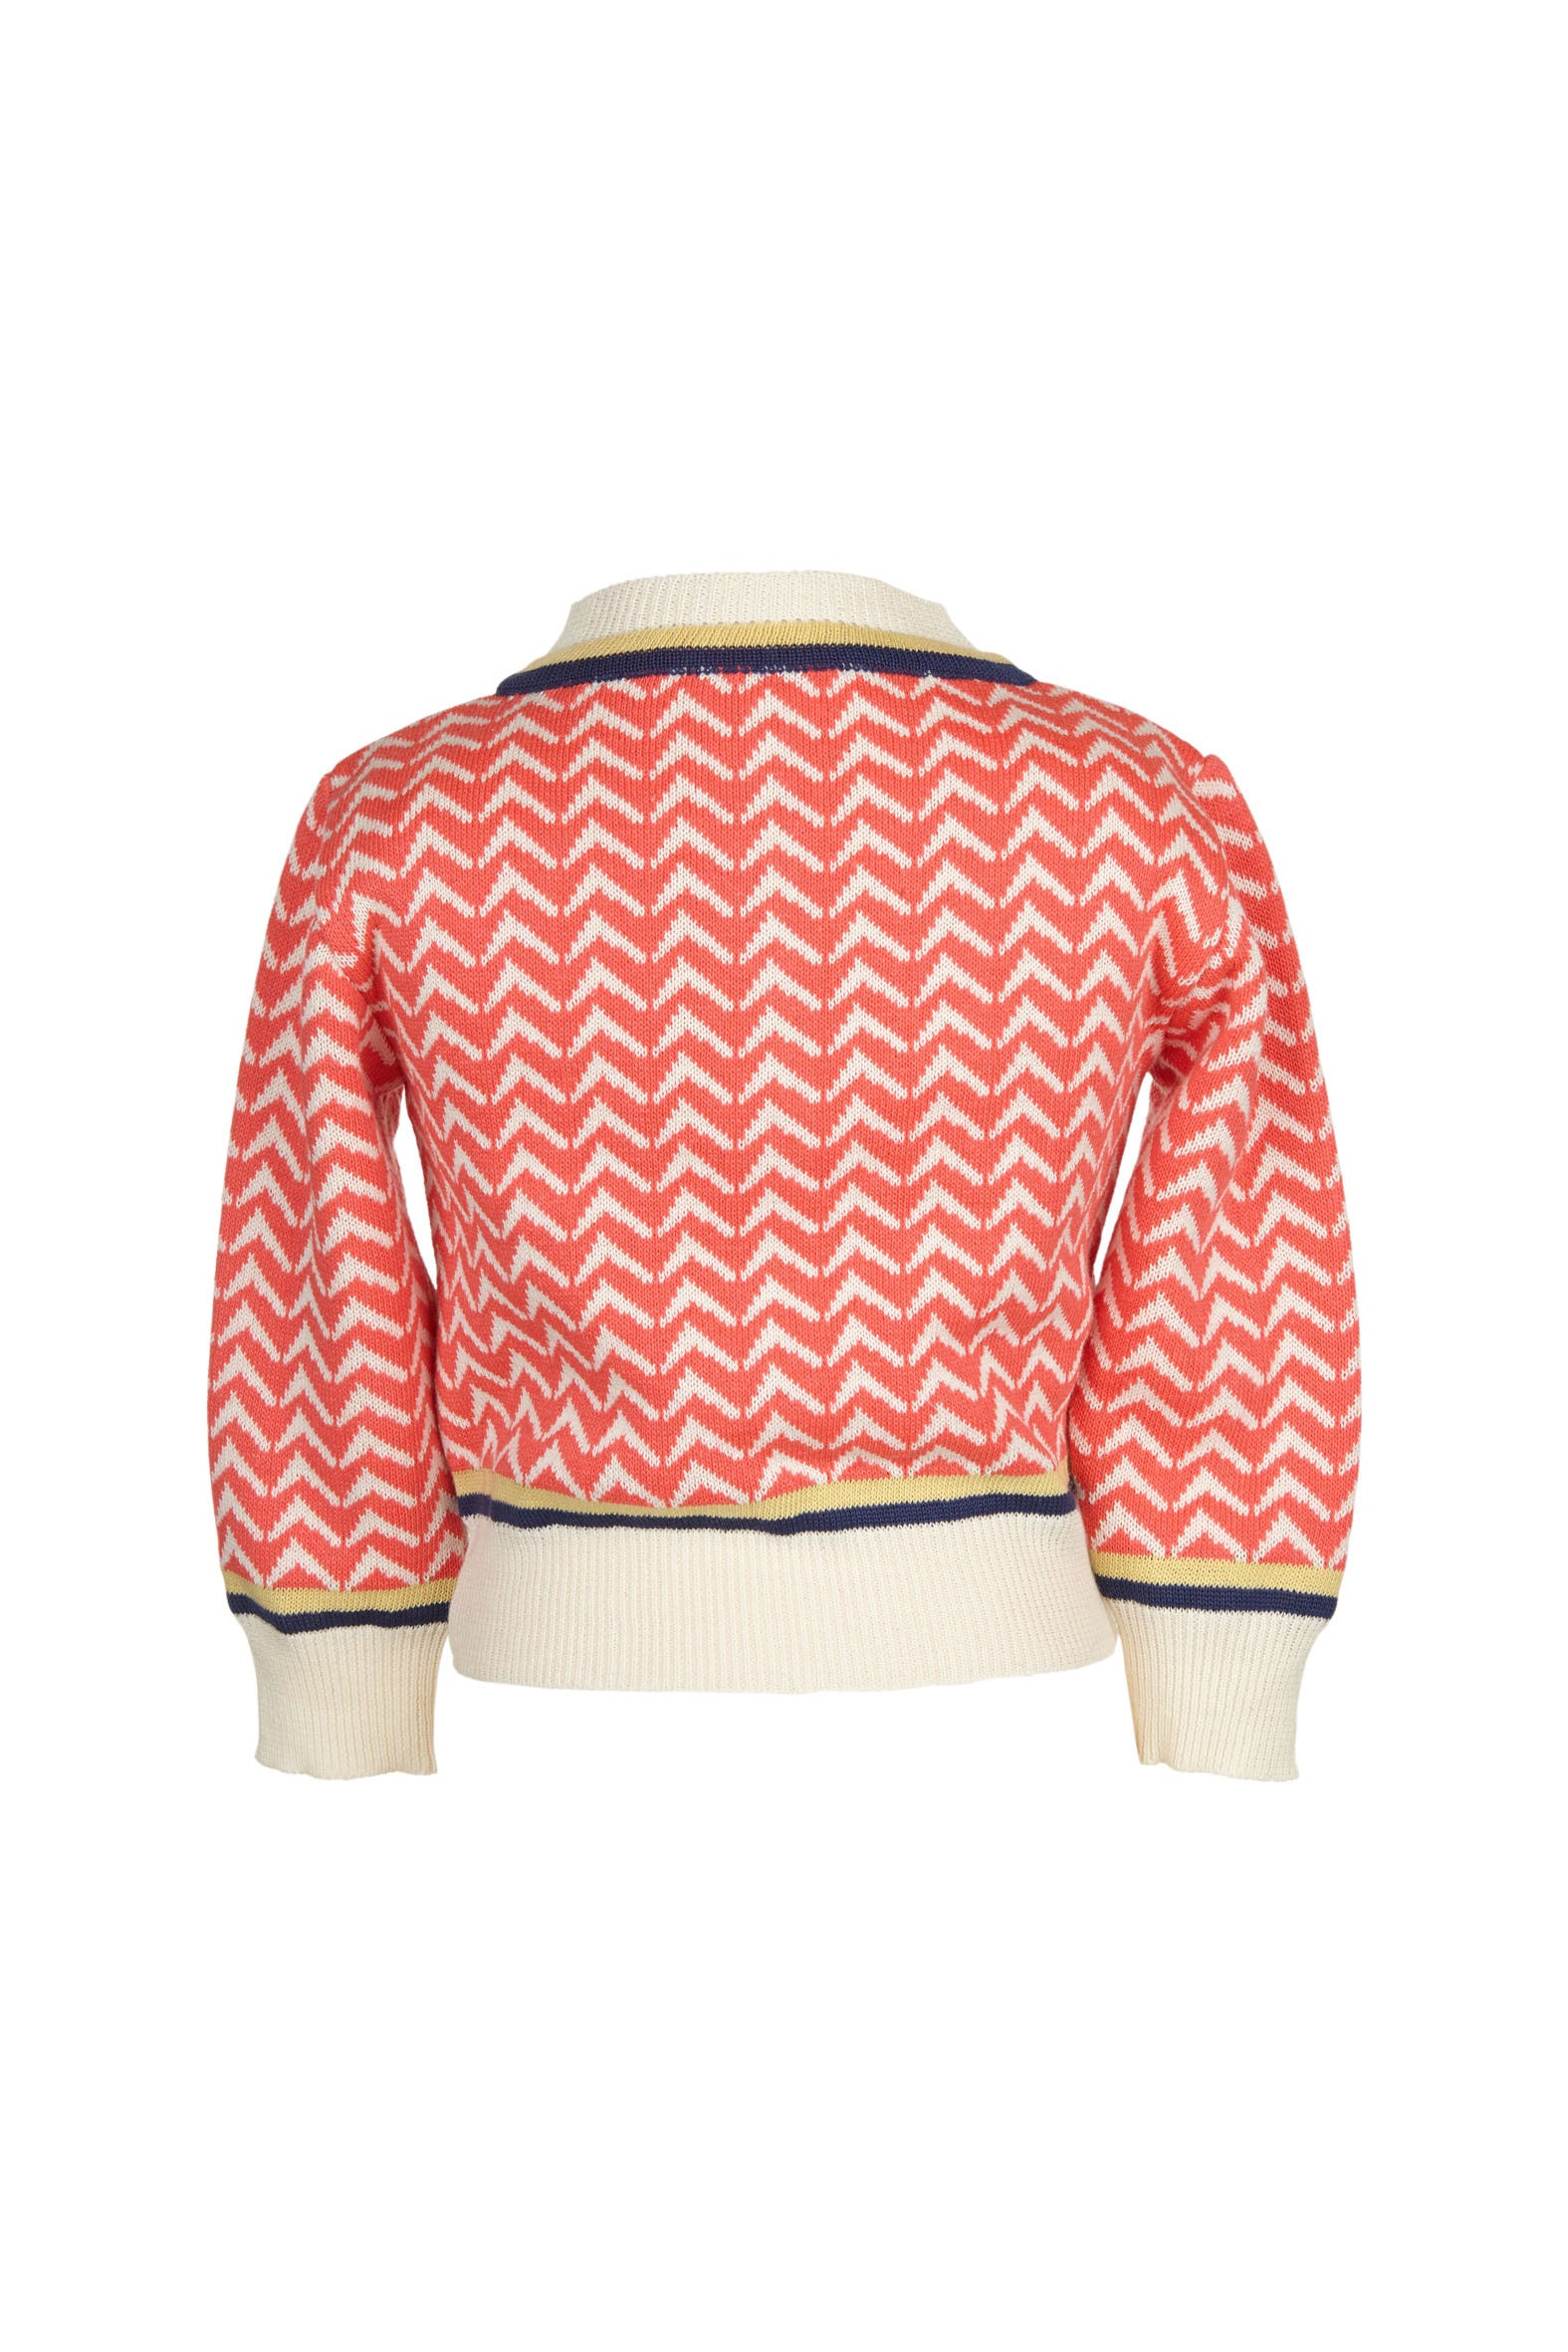 Children's Coral Cardigan with Arrows Print | 100% Cotton | Palava